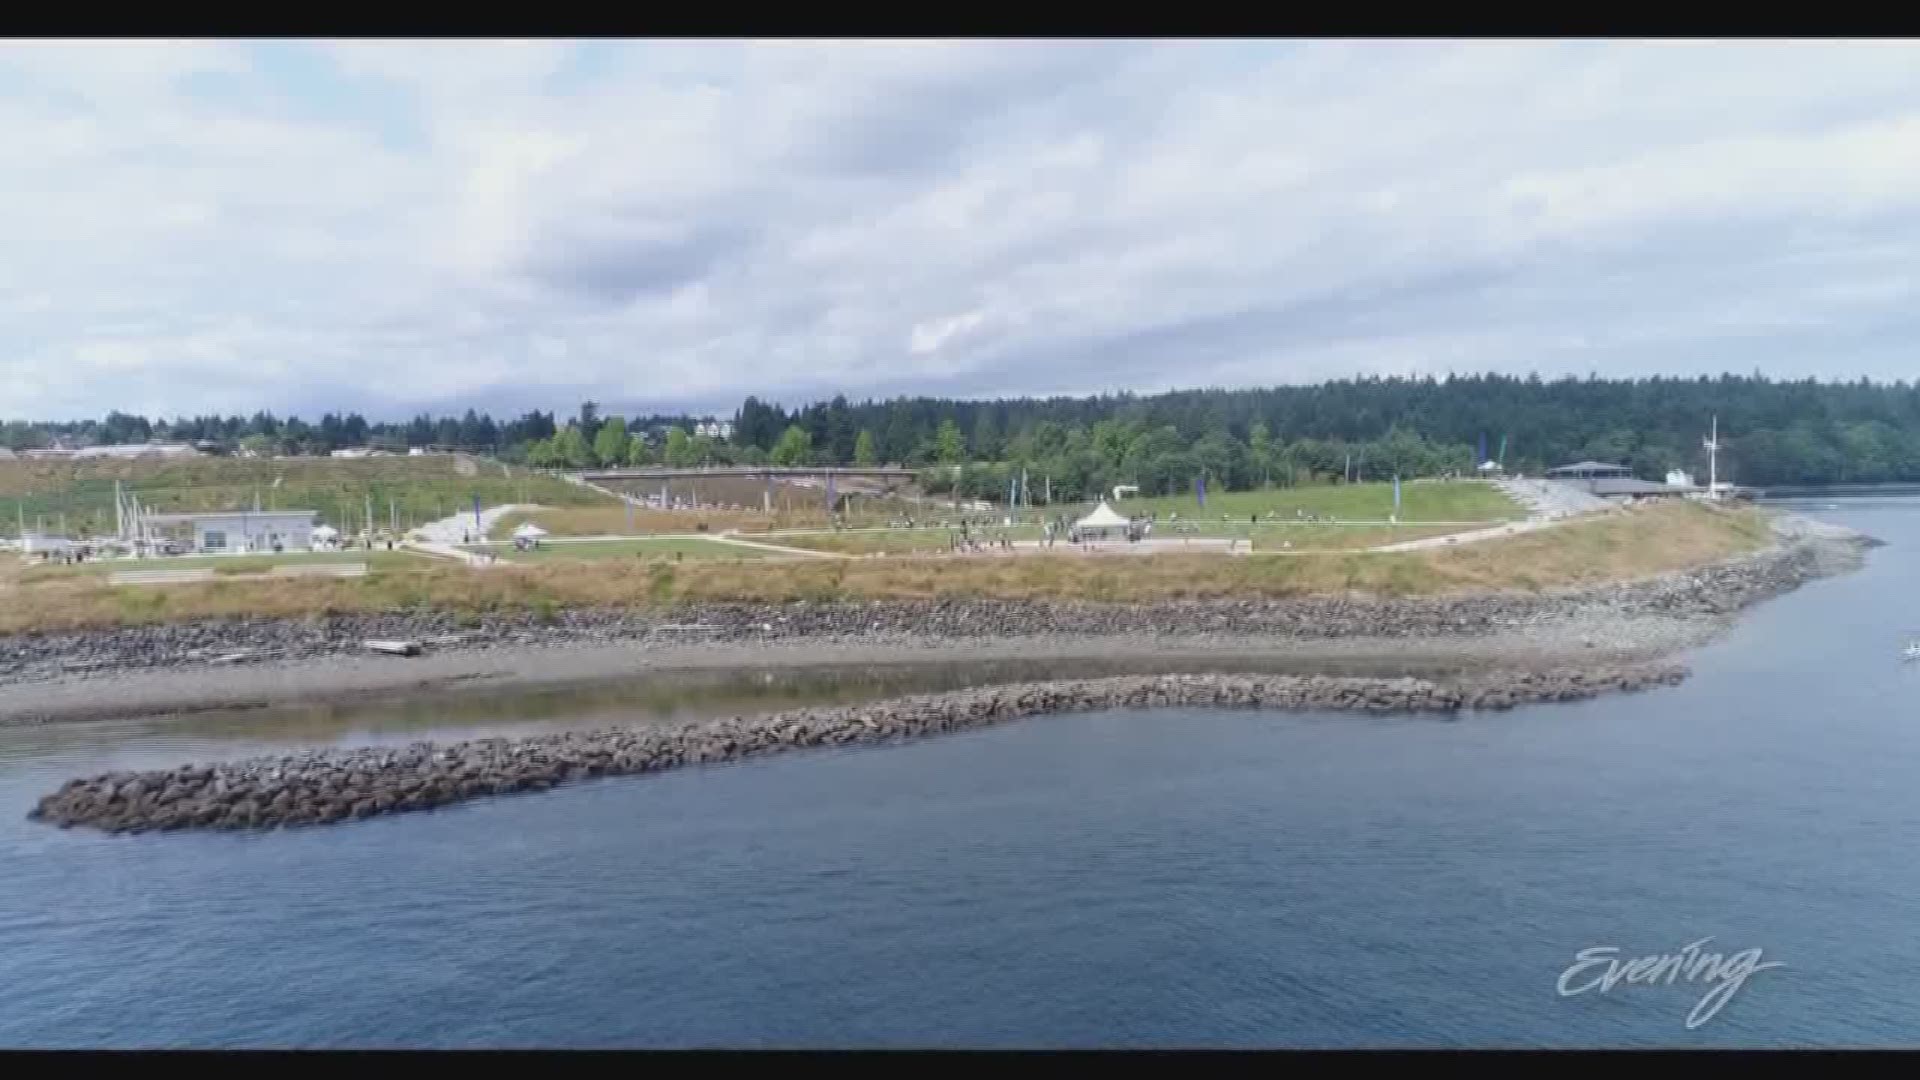 Tacoma's Dune Peninsula at Point Defiance Park is getting rave reviews from visitors